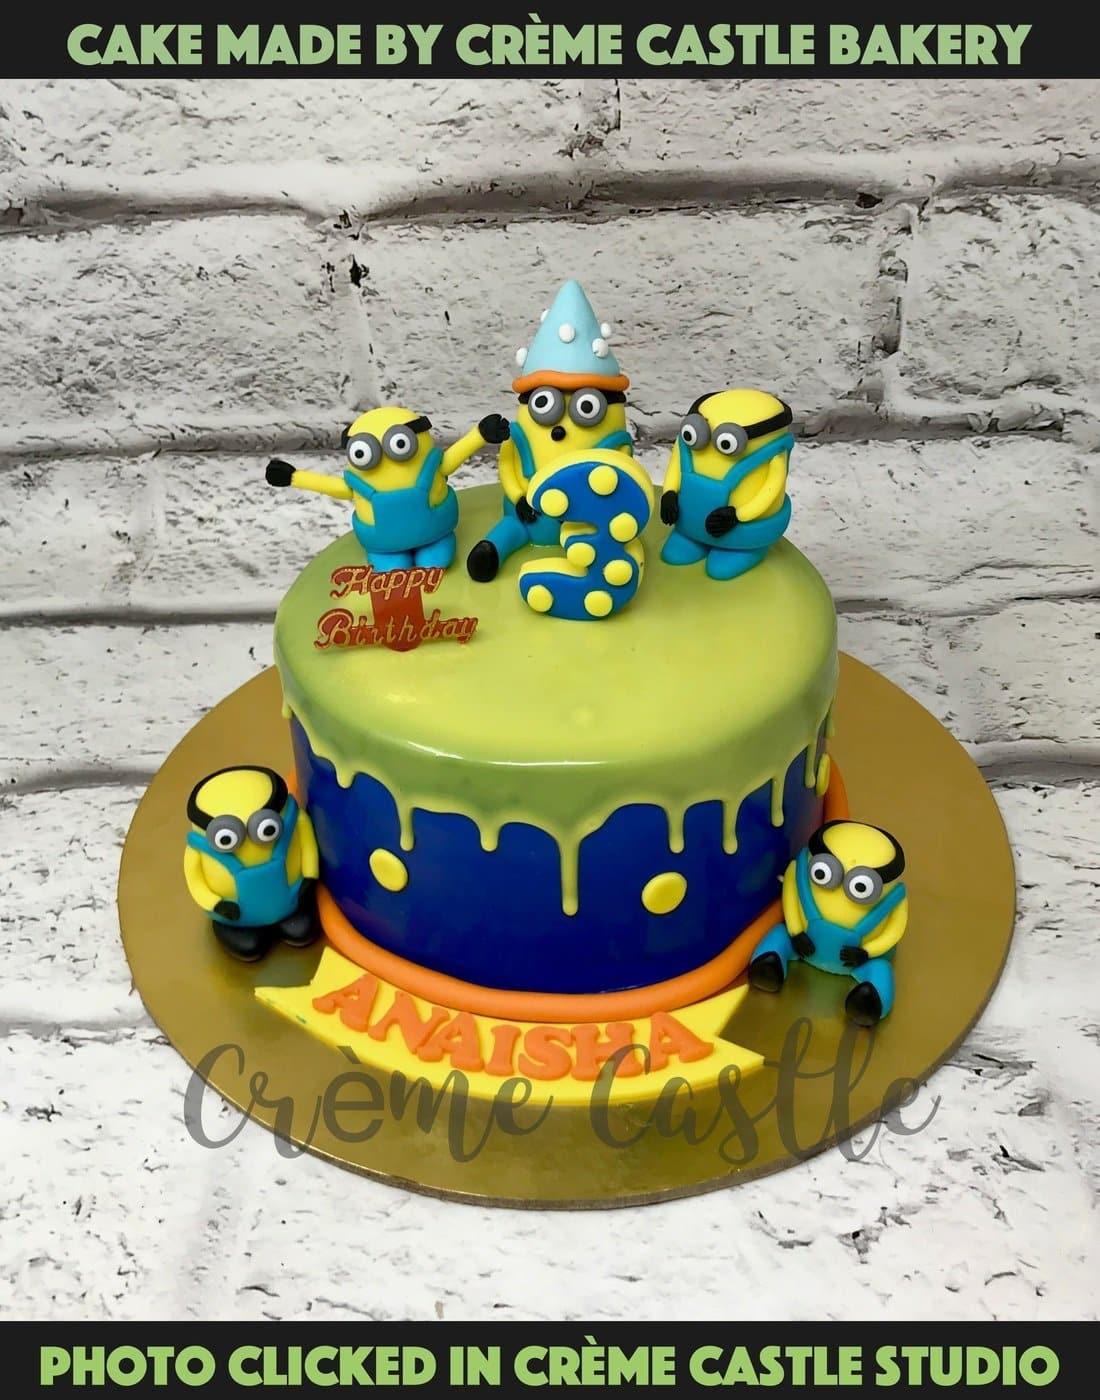 Batman minion cake! Still getting there on the fondant... 🎂🎂 #minioncake  #batmancake #fondantcake #mollyskitchensydney | Instagram